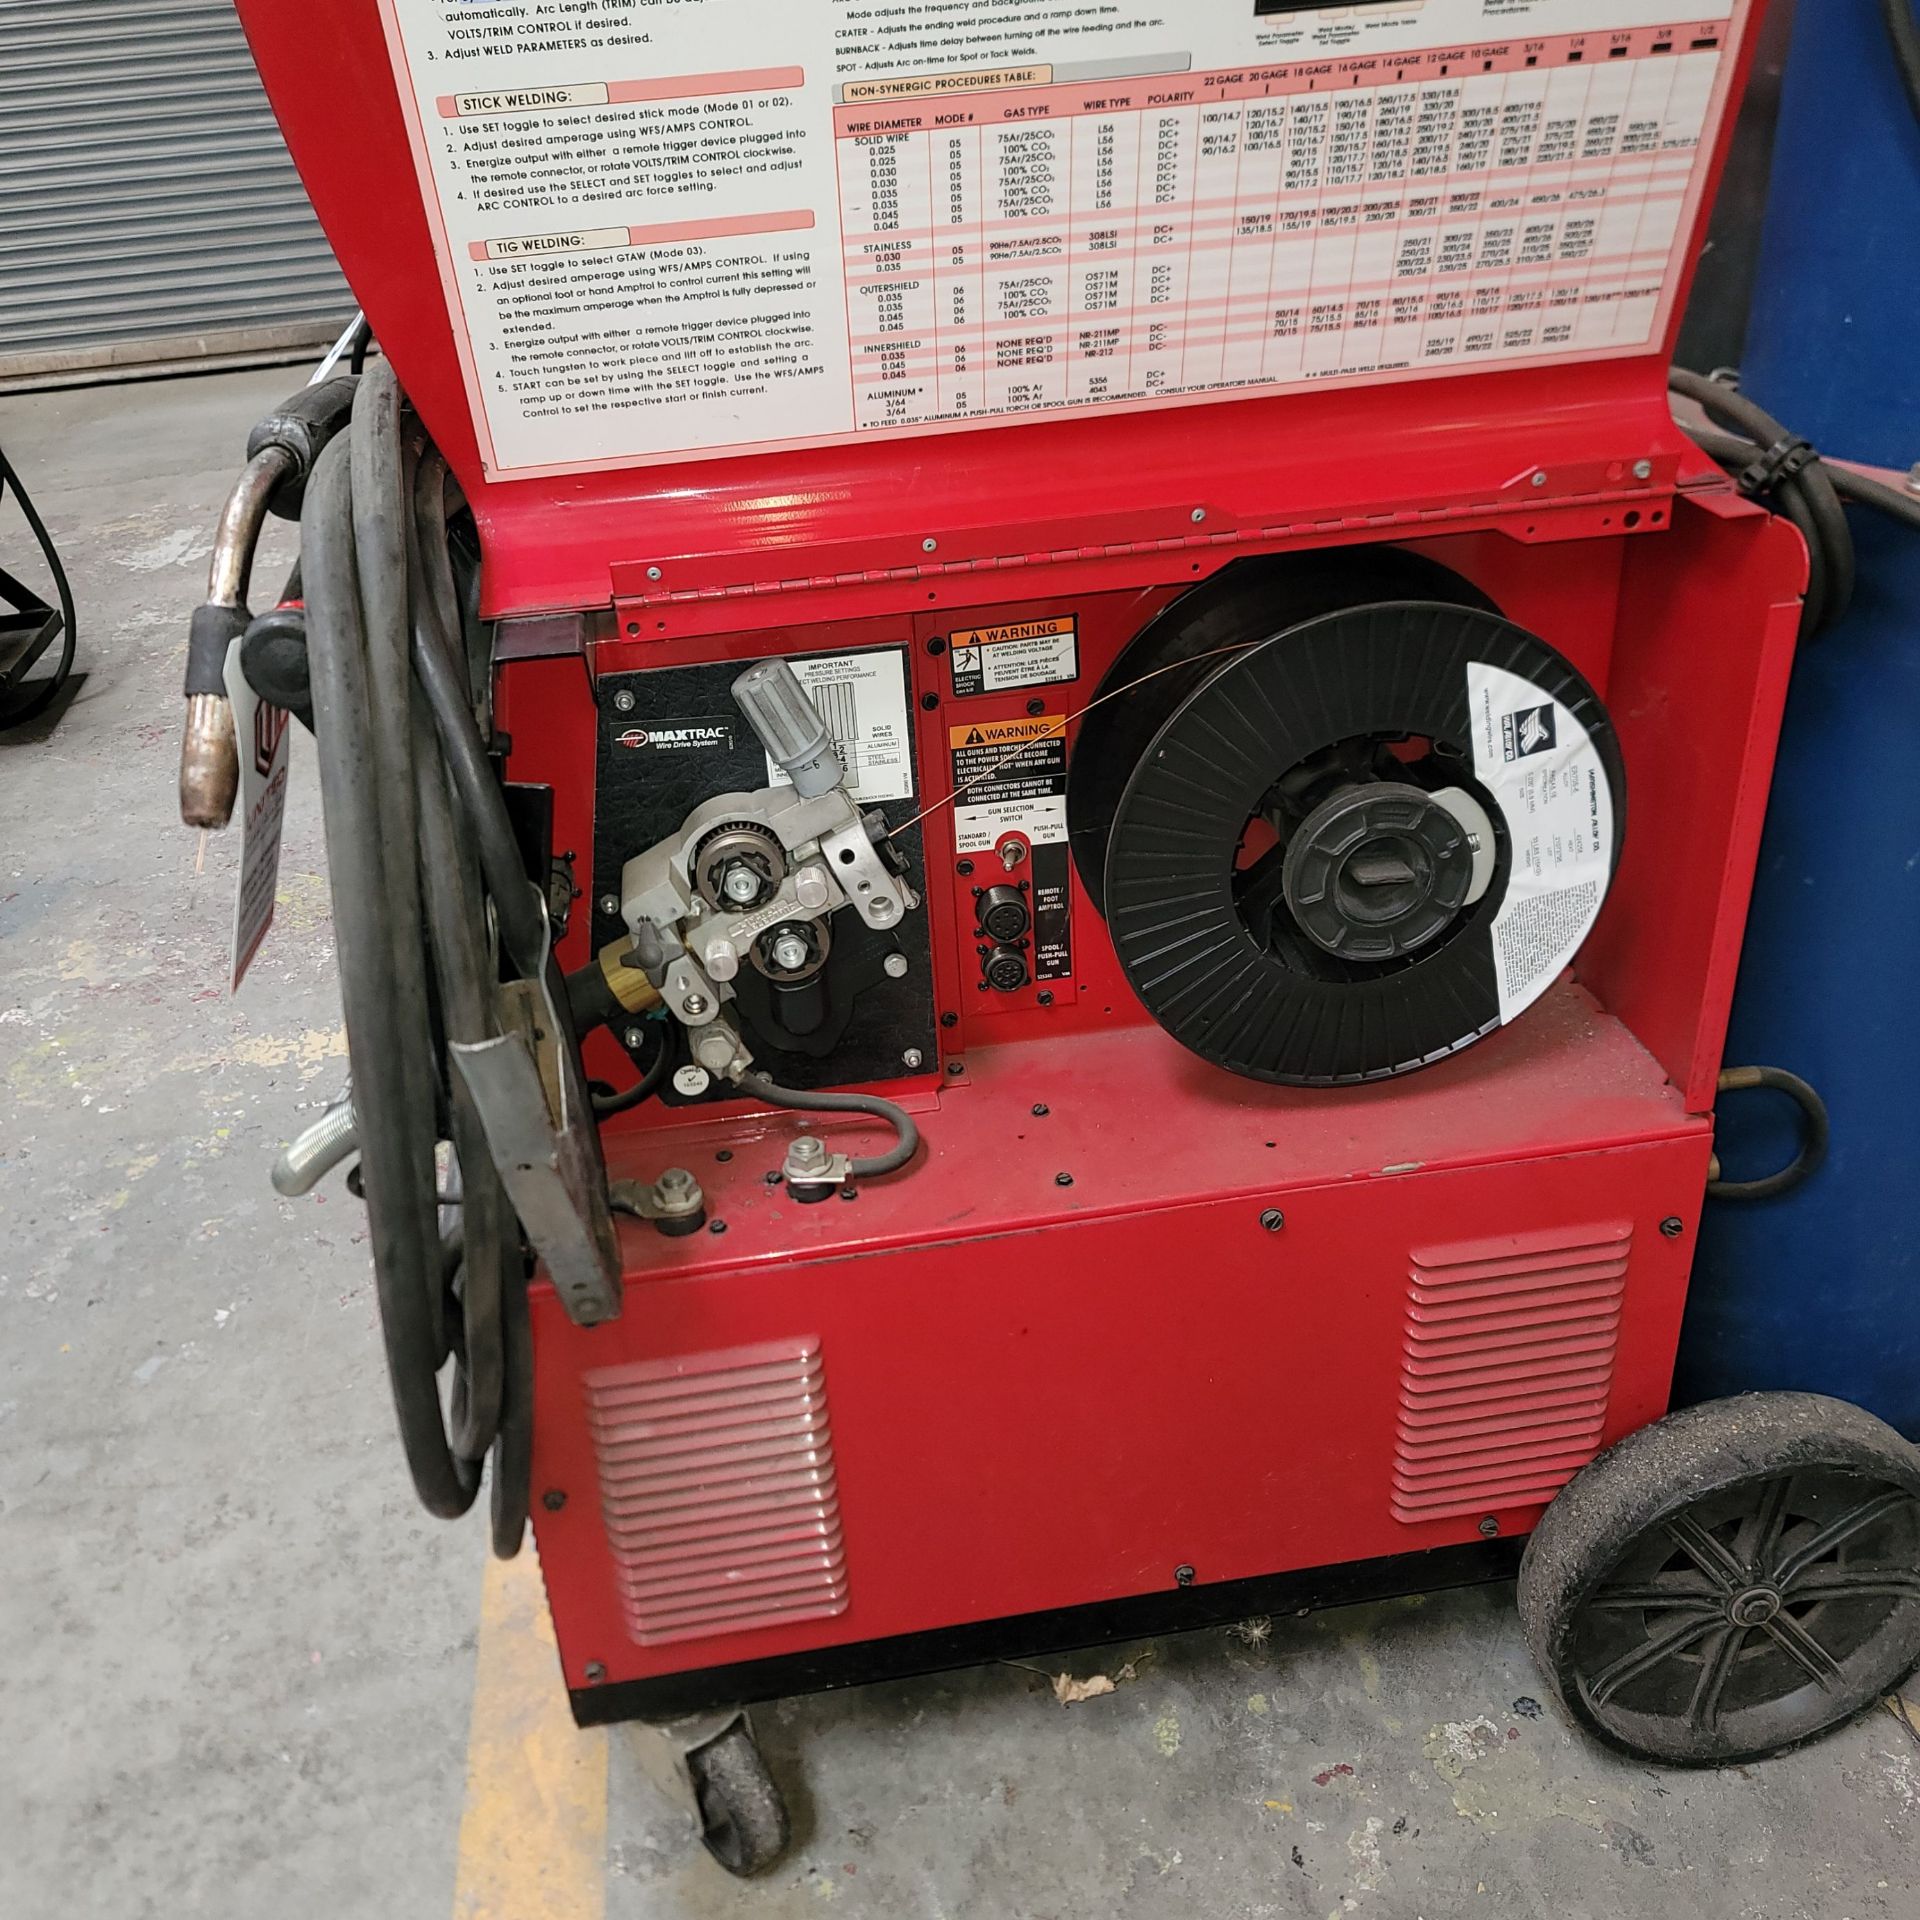 LINCOLN ELECTRIC POWER MIG 350MP, K2403-2, CODE: 11827, S/N U1120410864, GAS CYLINDER NOT INCLUDED - Image 2 of 3